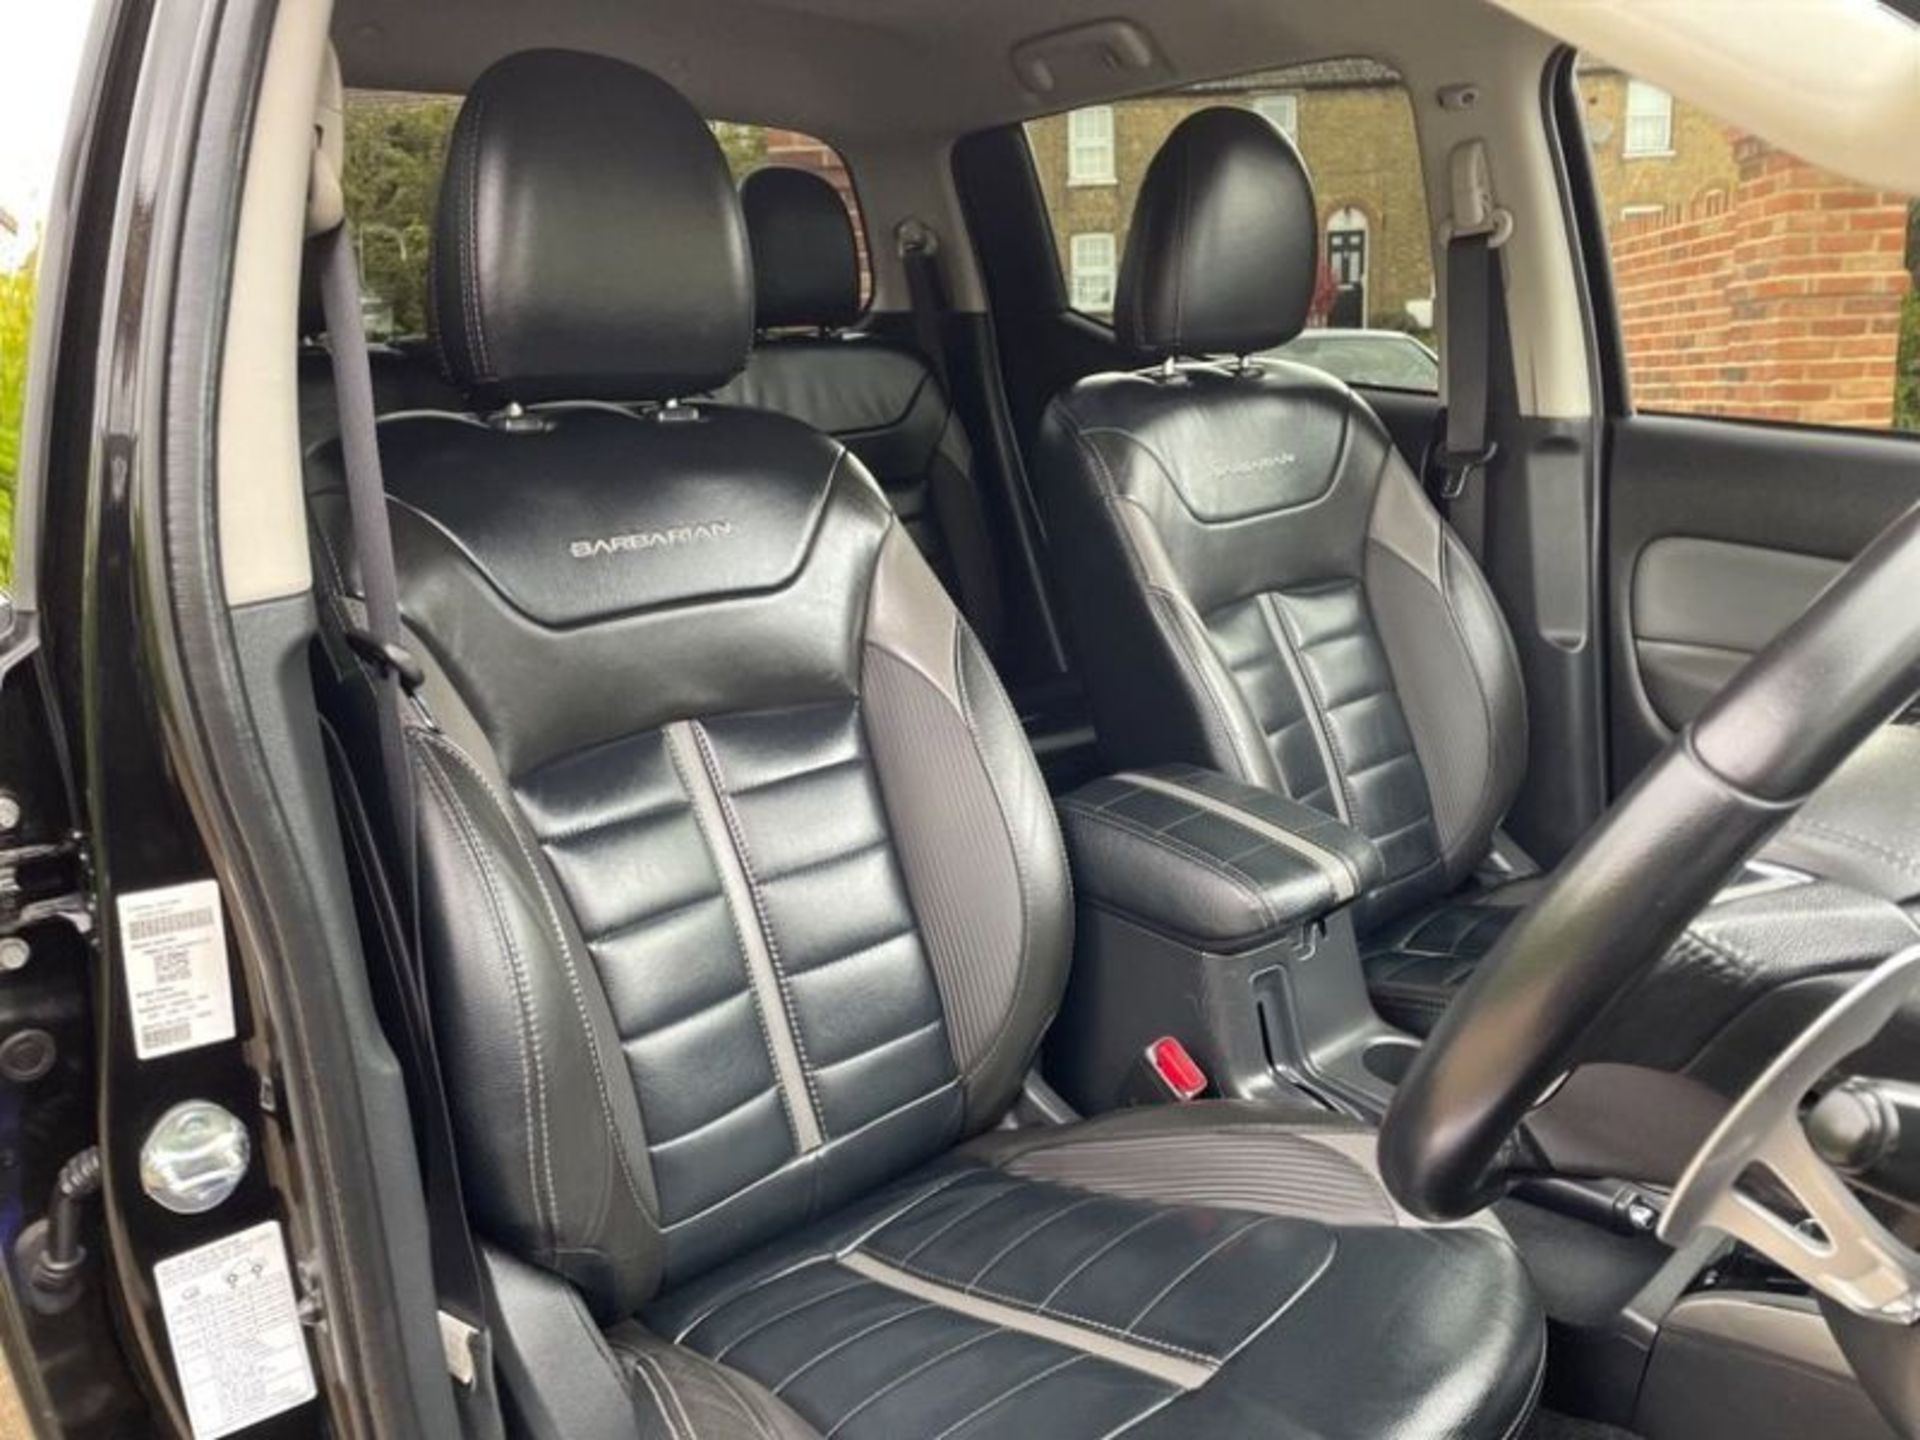 Mitsubishi L200 "Barbarian" Auto (178) 2018 Model - 1 Owner -Leather -Sat Nav -Cruise - Fully Loaded - Image 5 of 7